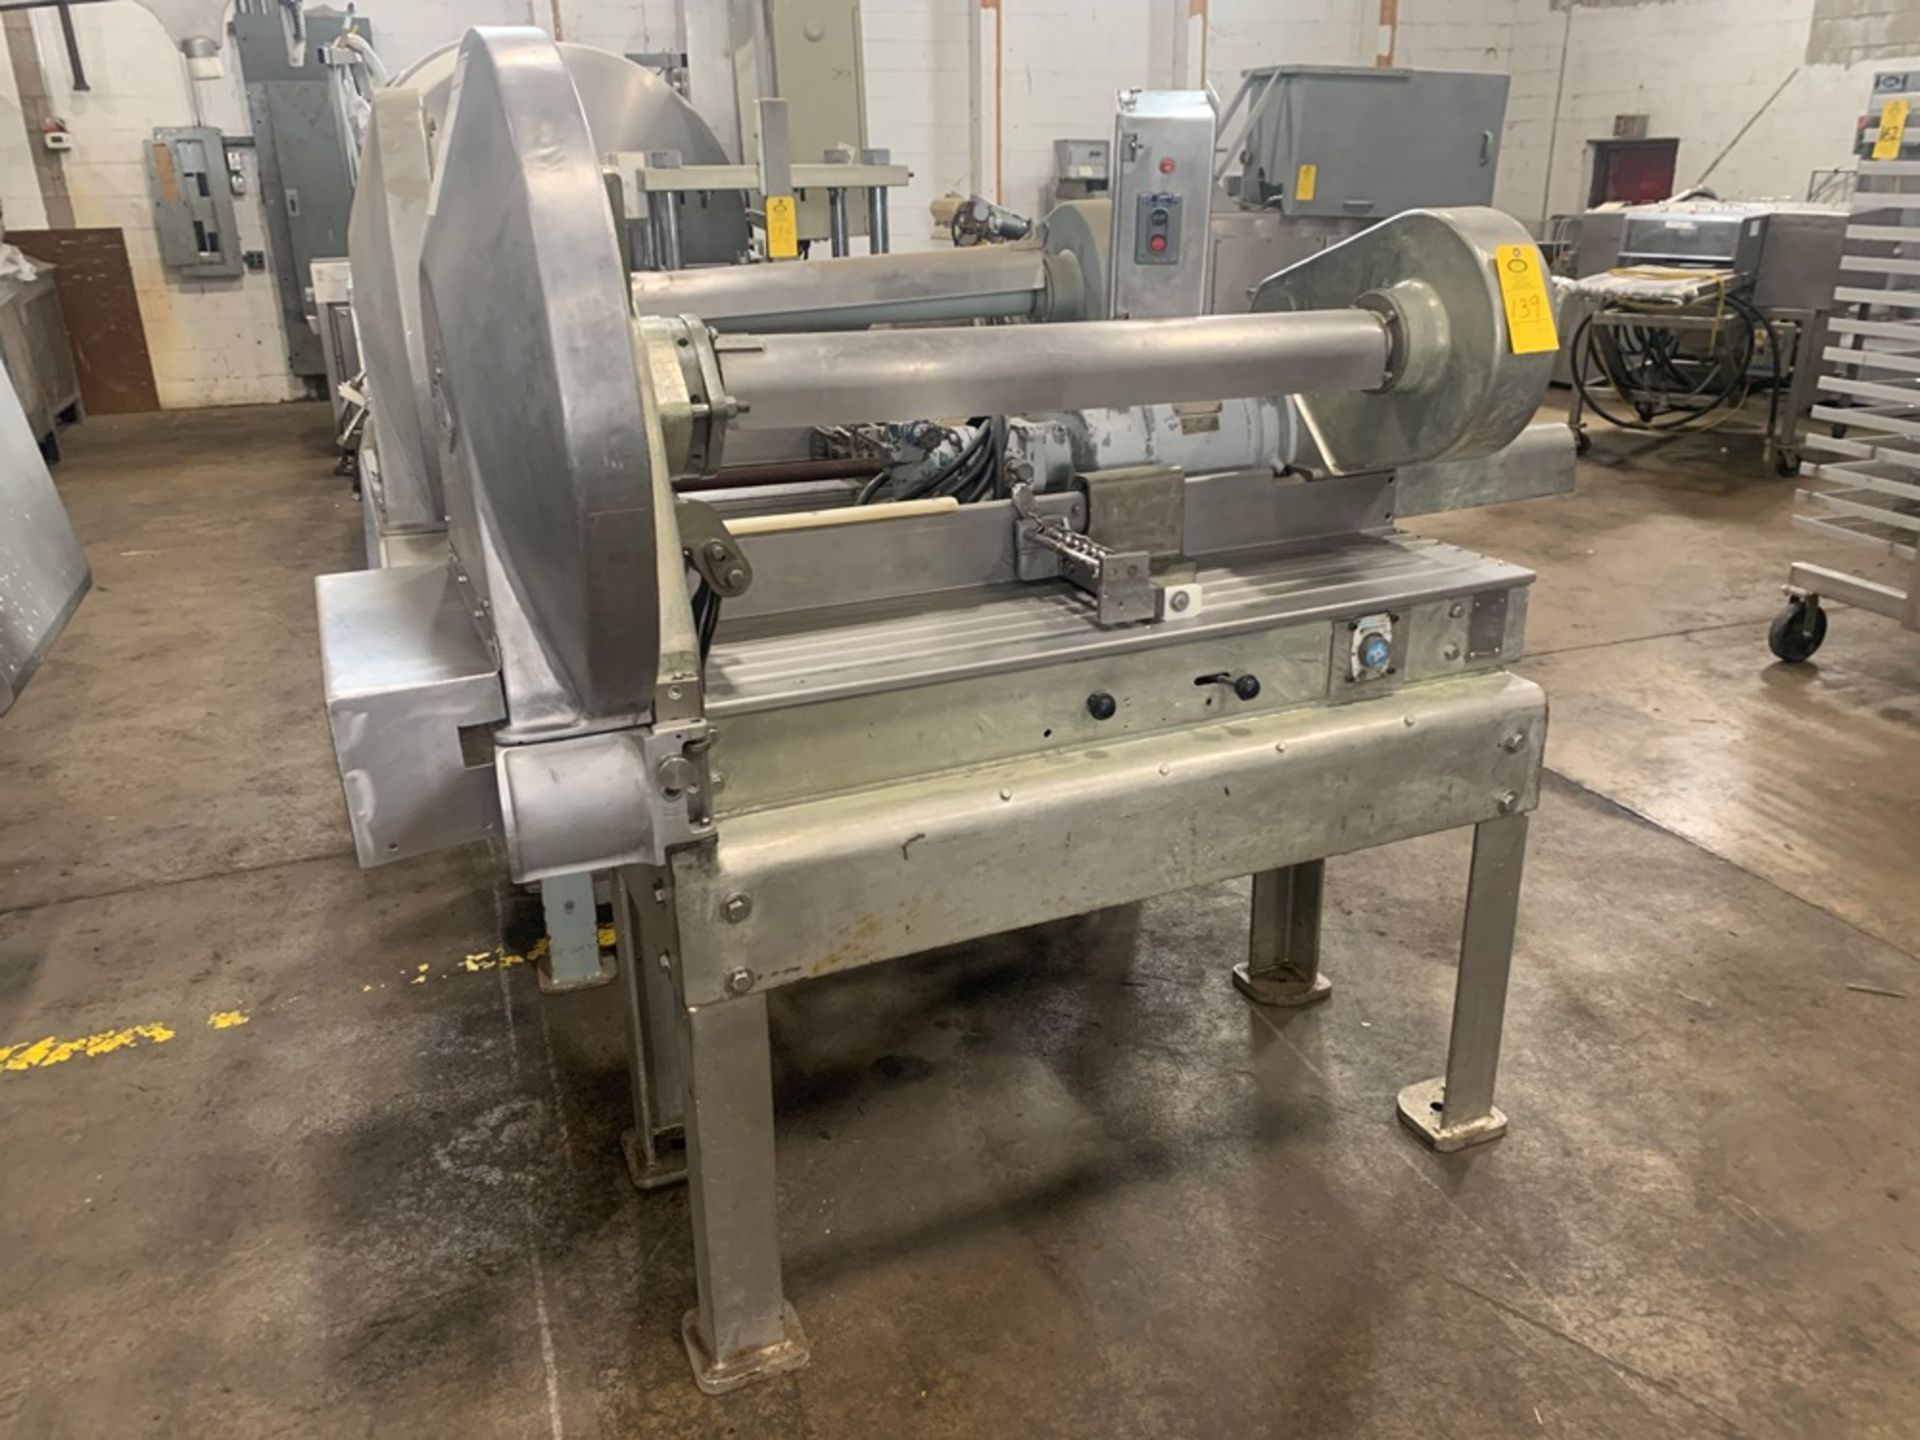 Anco Mdl. 827 Ram Feed Bacon Slicer, re-tinned (Located in Plano, IL)